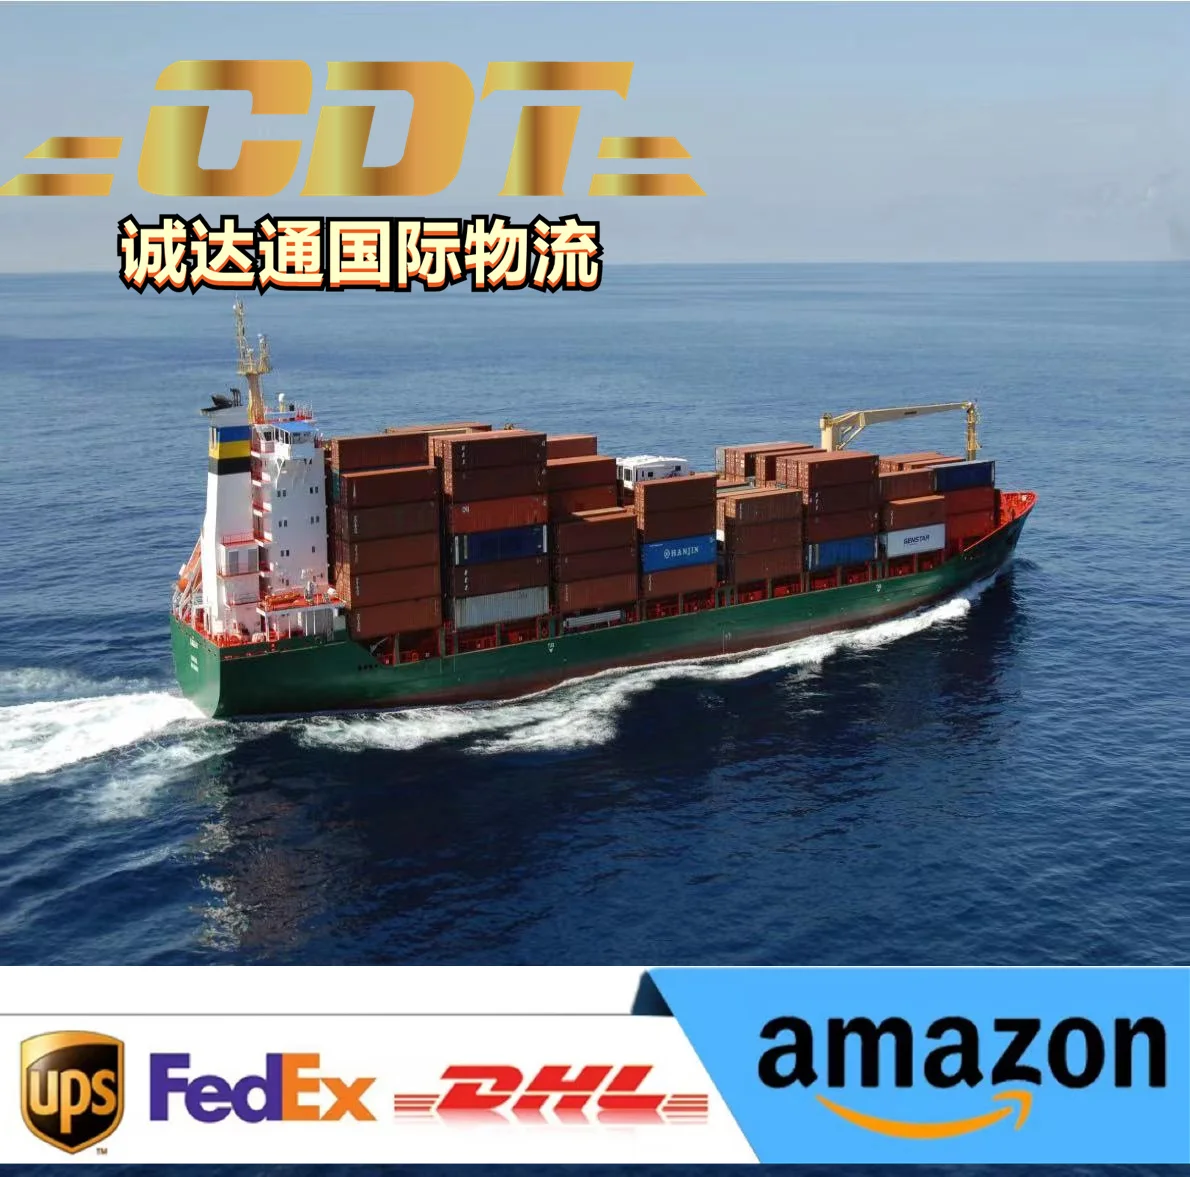 FBA shipping express AMZ sea freight forwarder from China to UK